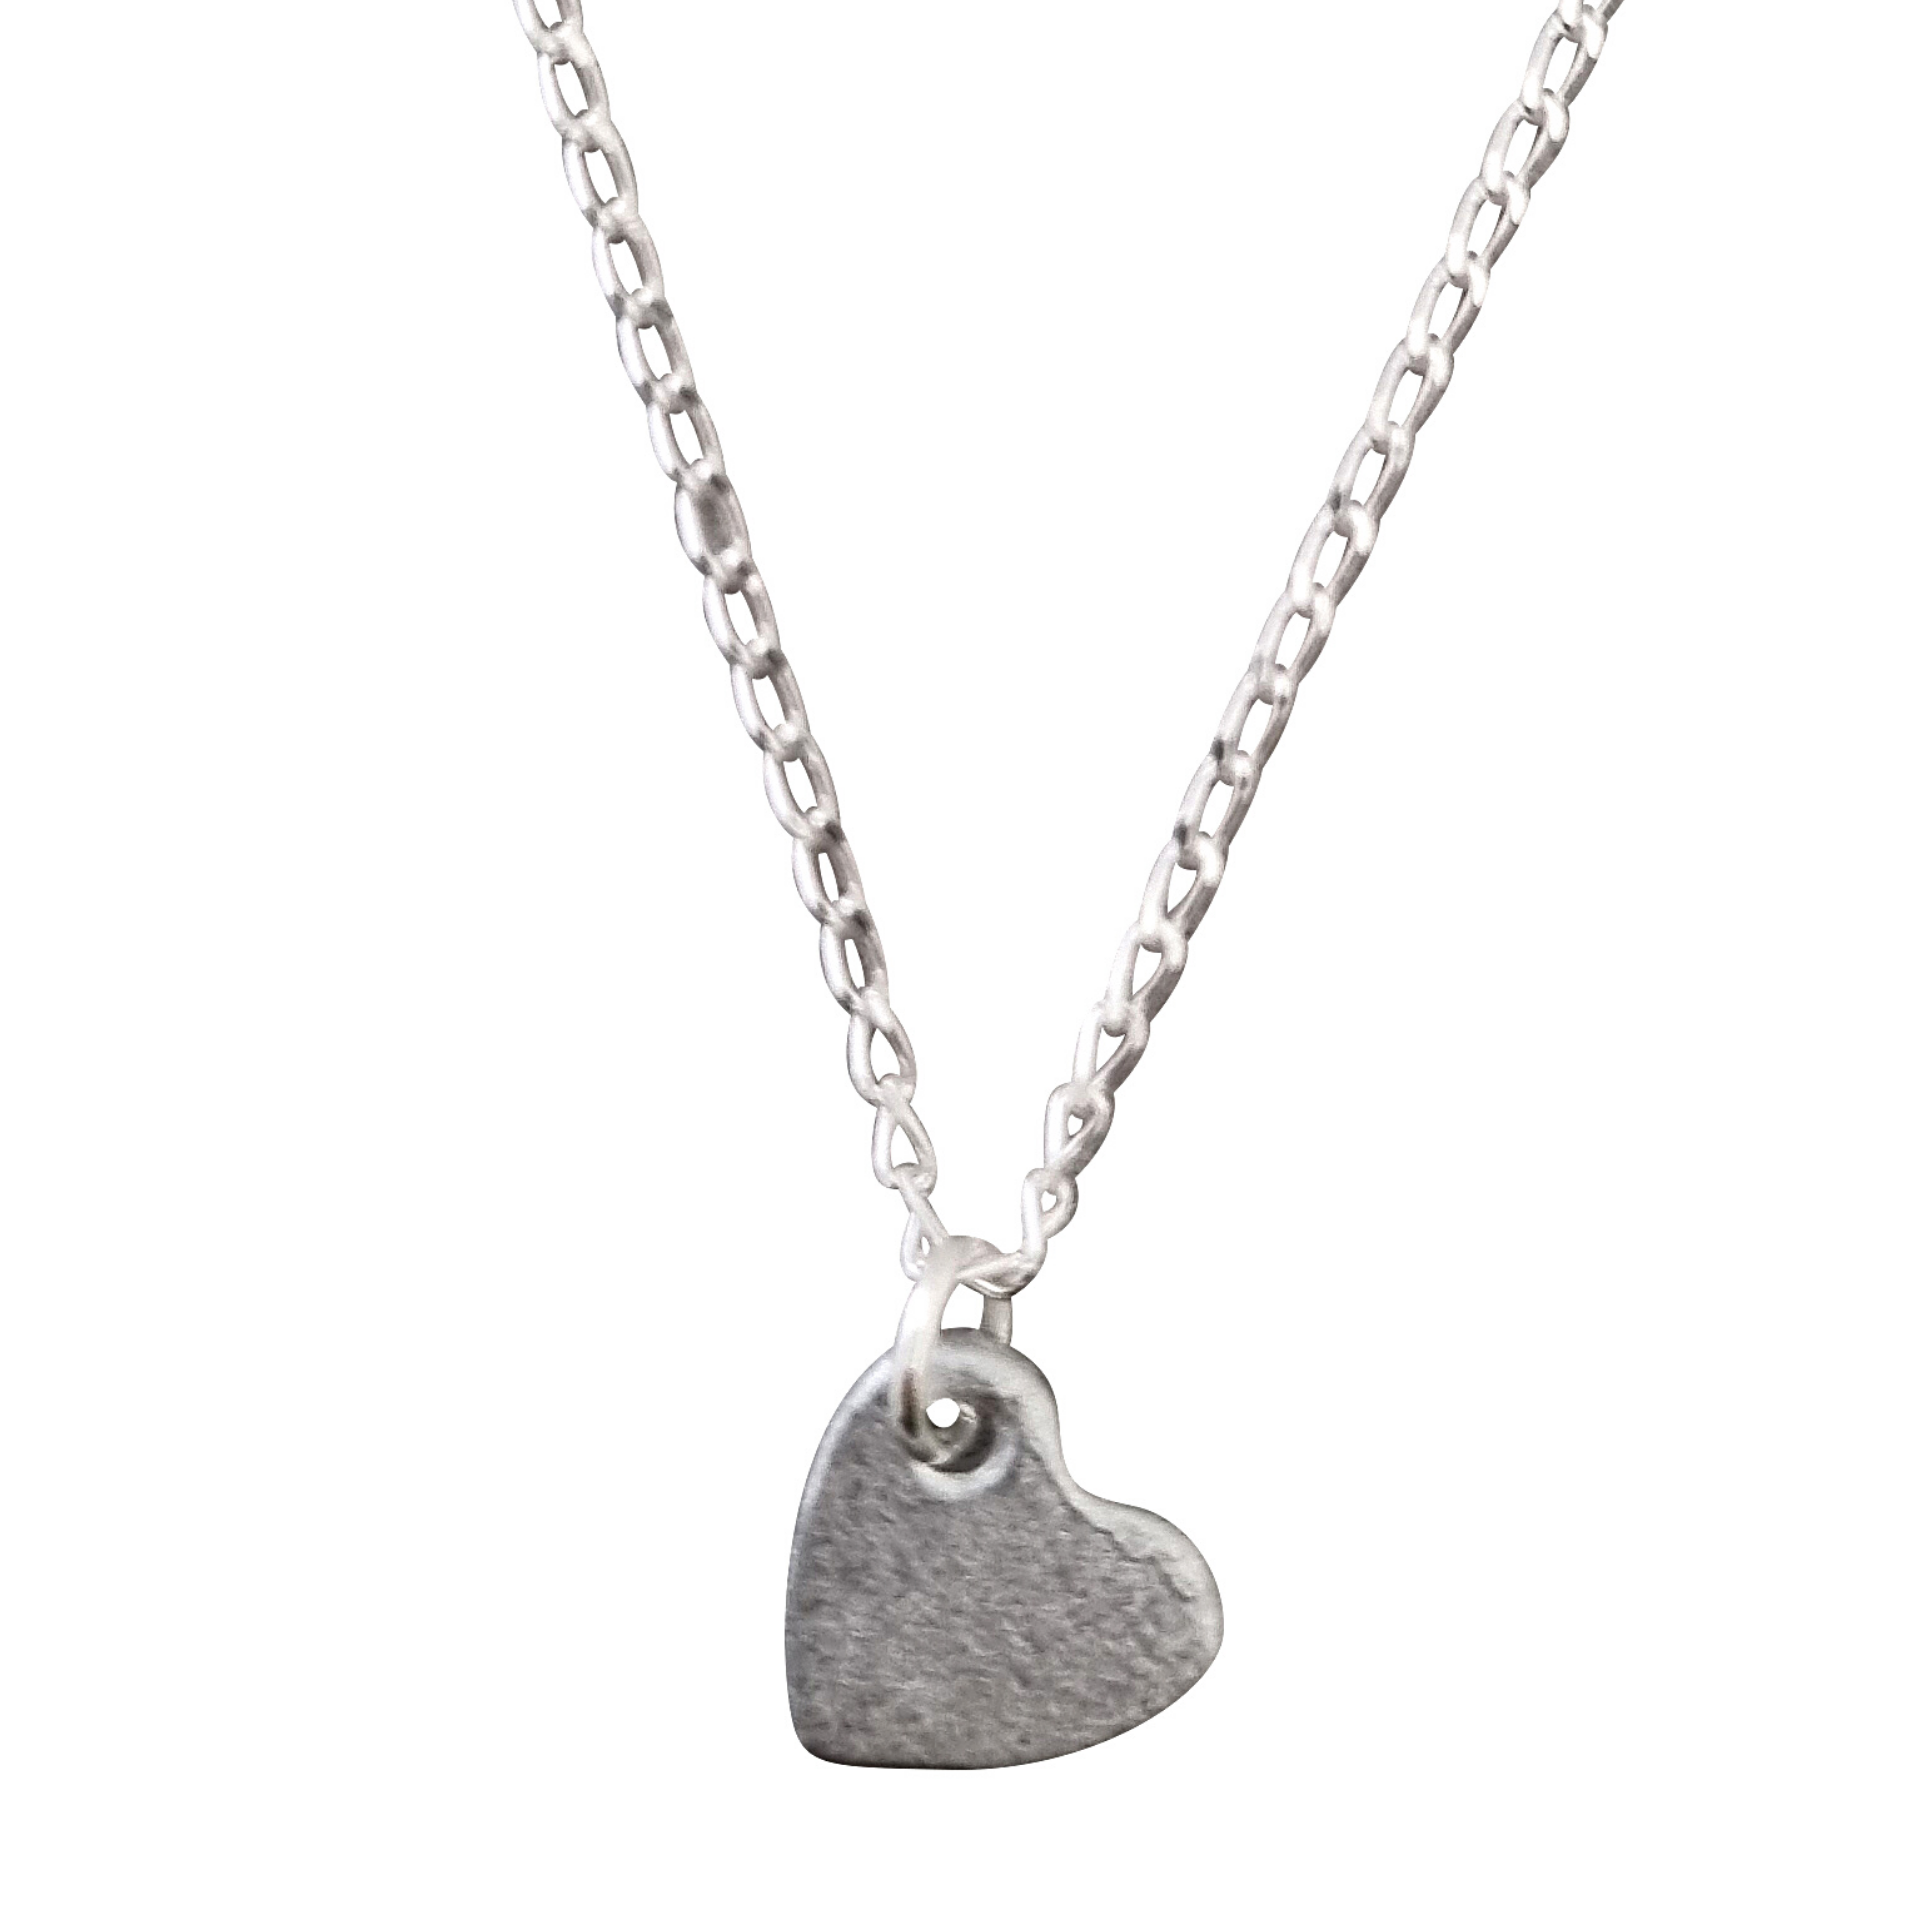 LOVEbomb Heart Charm Pendant on Sterling Silver Chain